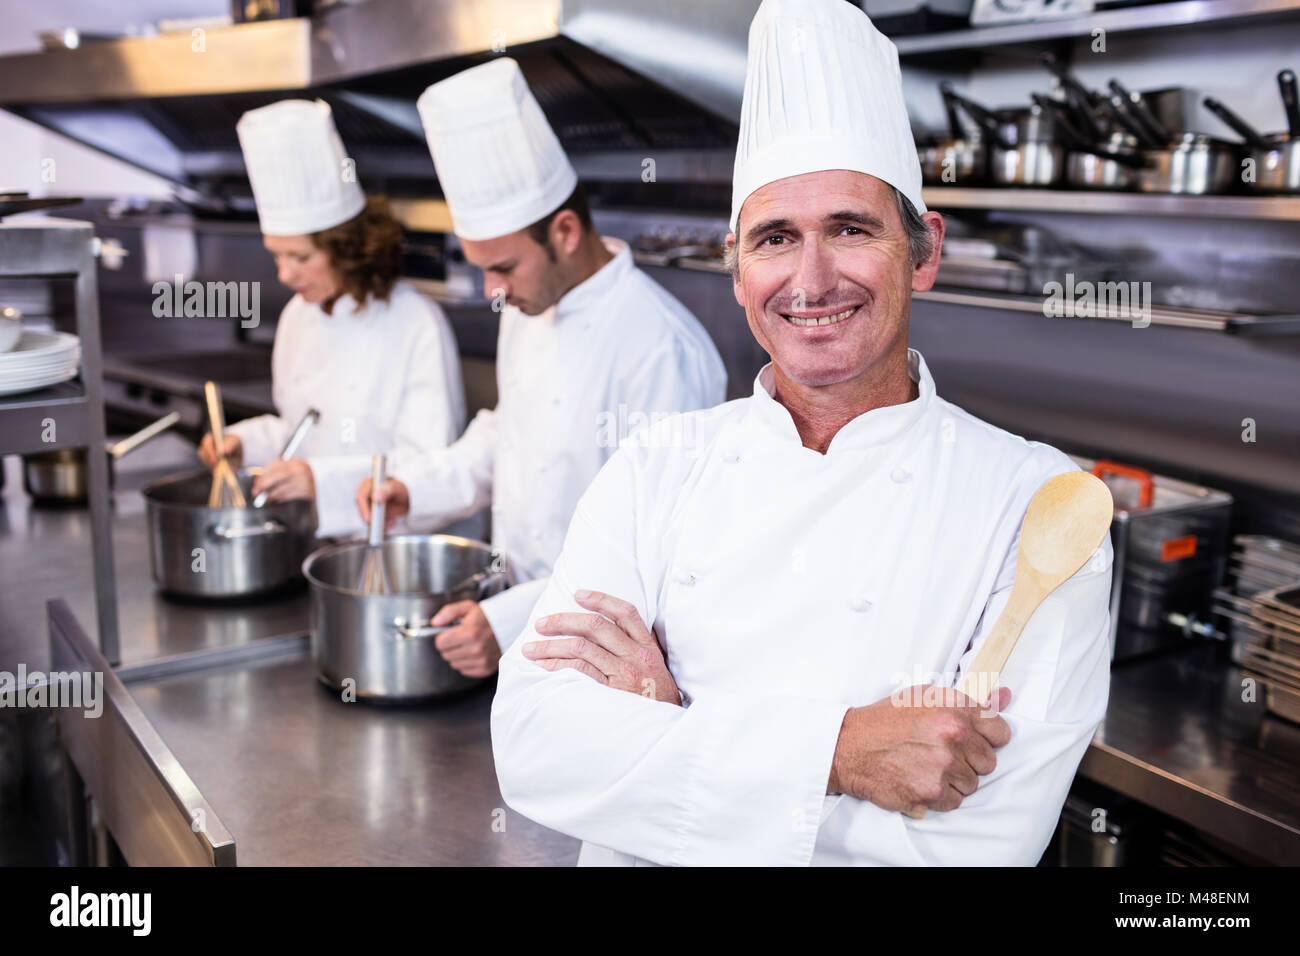 Portrait of smiling chef in commercial kitchen Stock Photo